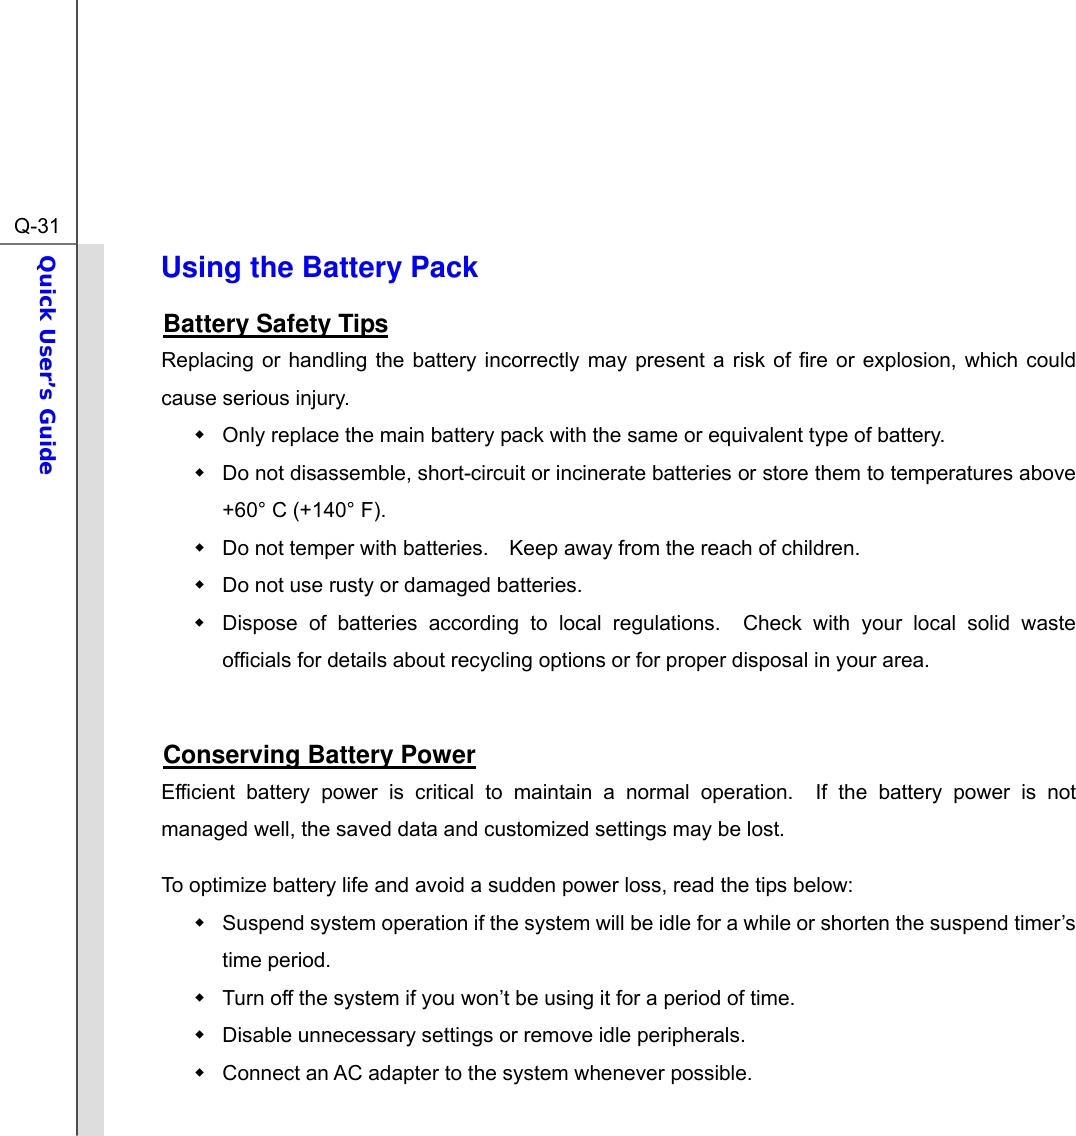  Q-31Quick User’s Guide  Using the Battery Pack Battery Safety Tips Replacing or handling the battery incorrectly may present a risk of fire or explosion, which could cause serious injury.   Only replace the main battery pack with the same or equivalent type of battery.   Do not disassemble, short-circuit or incinerate batteries or store them to temperatures above +60° C (+140° F).   Do not temper with batteries.    Keep away from the reach of children.   Do not use rusty or damaged batteries.   Dispose of batteries according to local regulations.  Check with your local solid waste officials for details about recycling options or for proper disposal in your area.  Conserving Battery Power Efficient battery power is critical to maintain a normal operation.  If the battery power is not managed well, the saved data and customized settings may be lost. To optimize battery life and avoid a sudden power loss, read the tips below:   Suspend system operation if the system will be idle for a while or shorten the suspend timer’s time period.   Turn off the system if you won’t be using it for a period of time.   Disable unnecessary settings or remove idle peripherals.   Connect an AC adapter to the system whenever possible. 